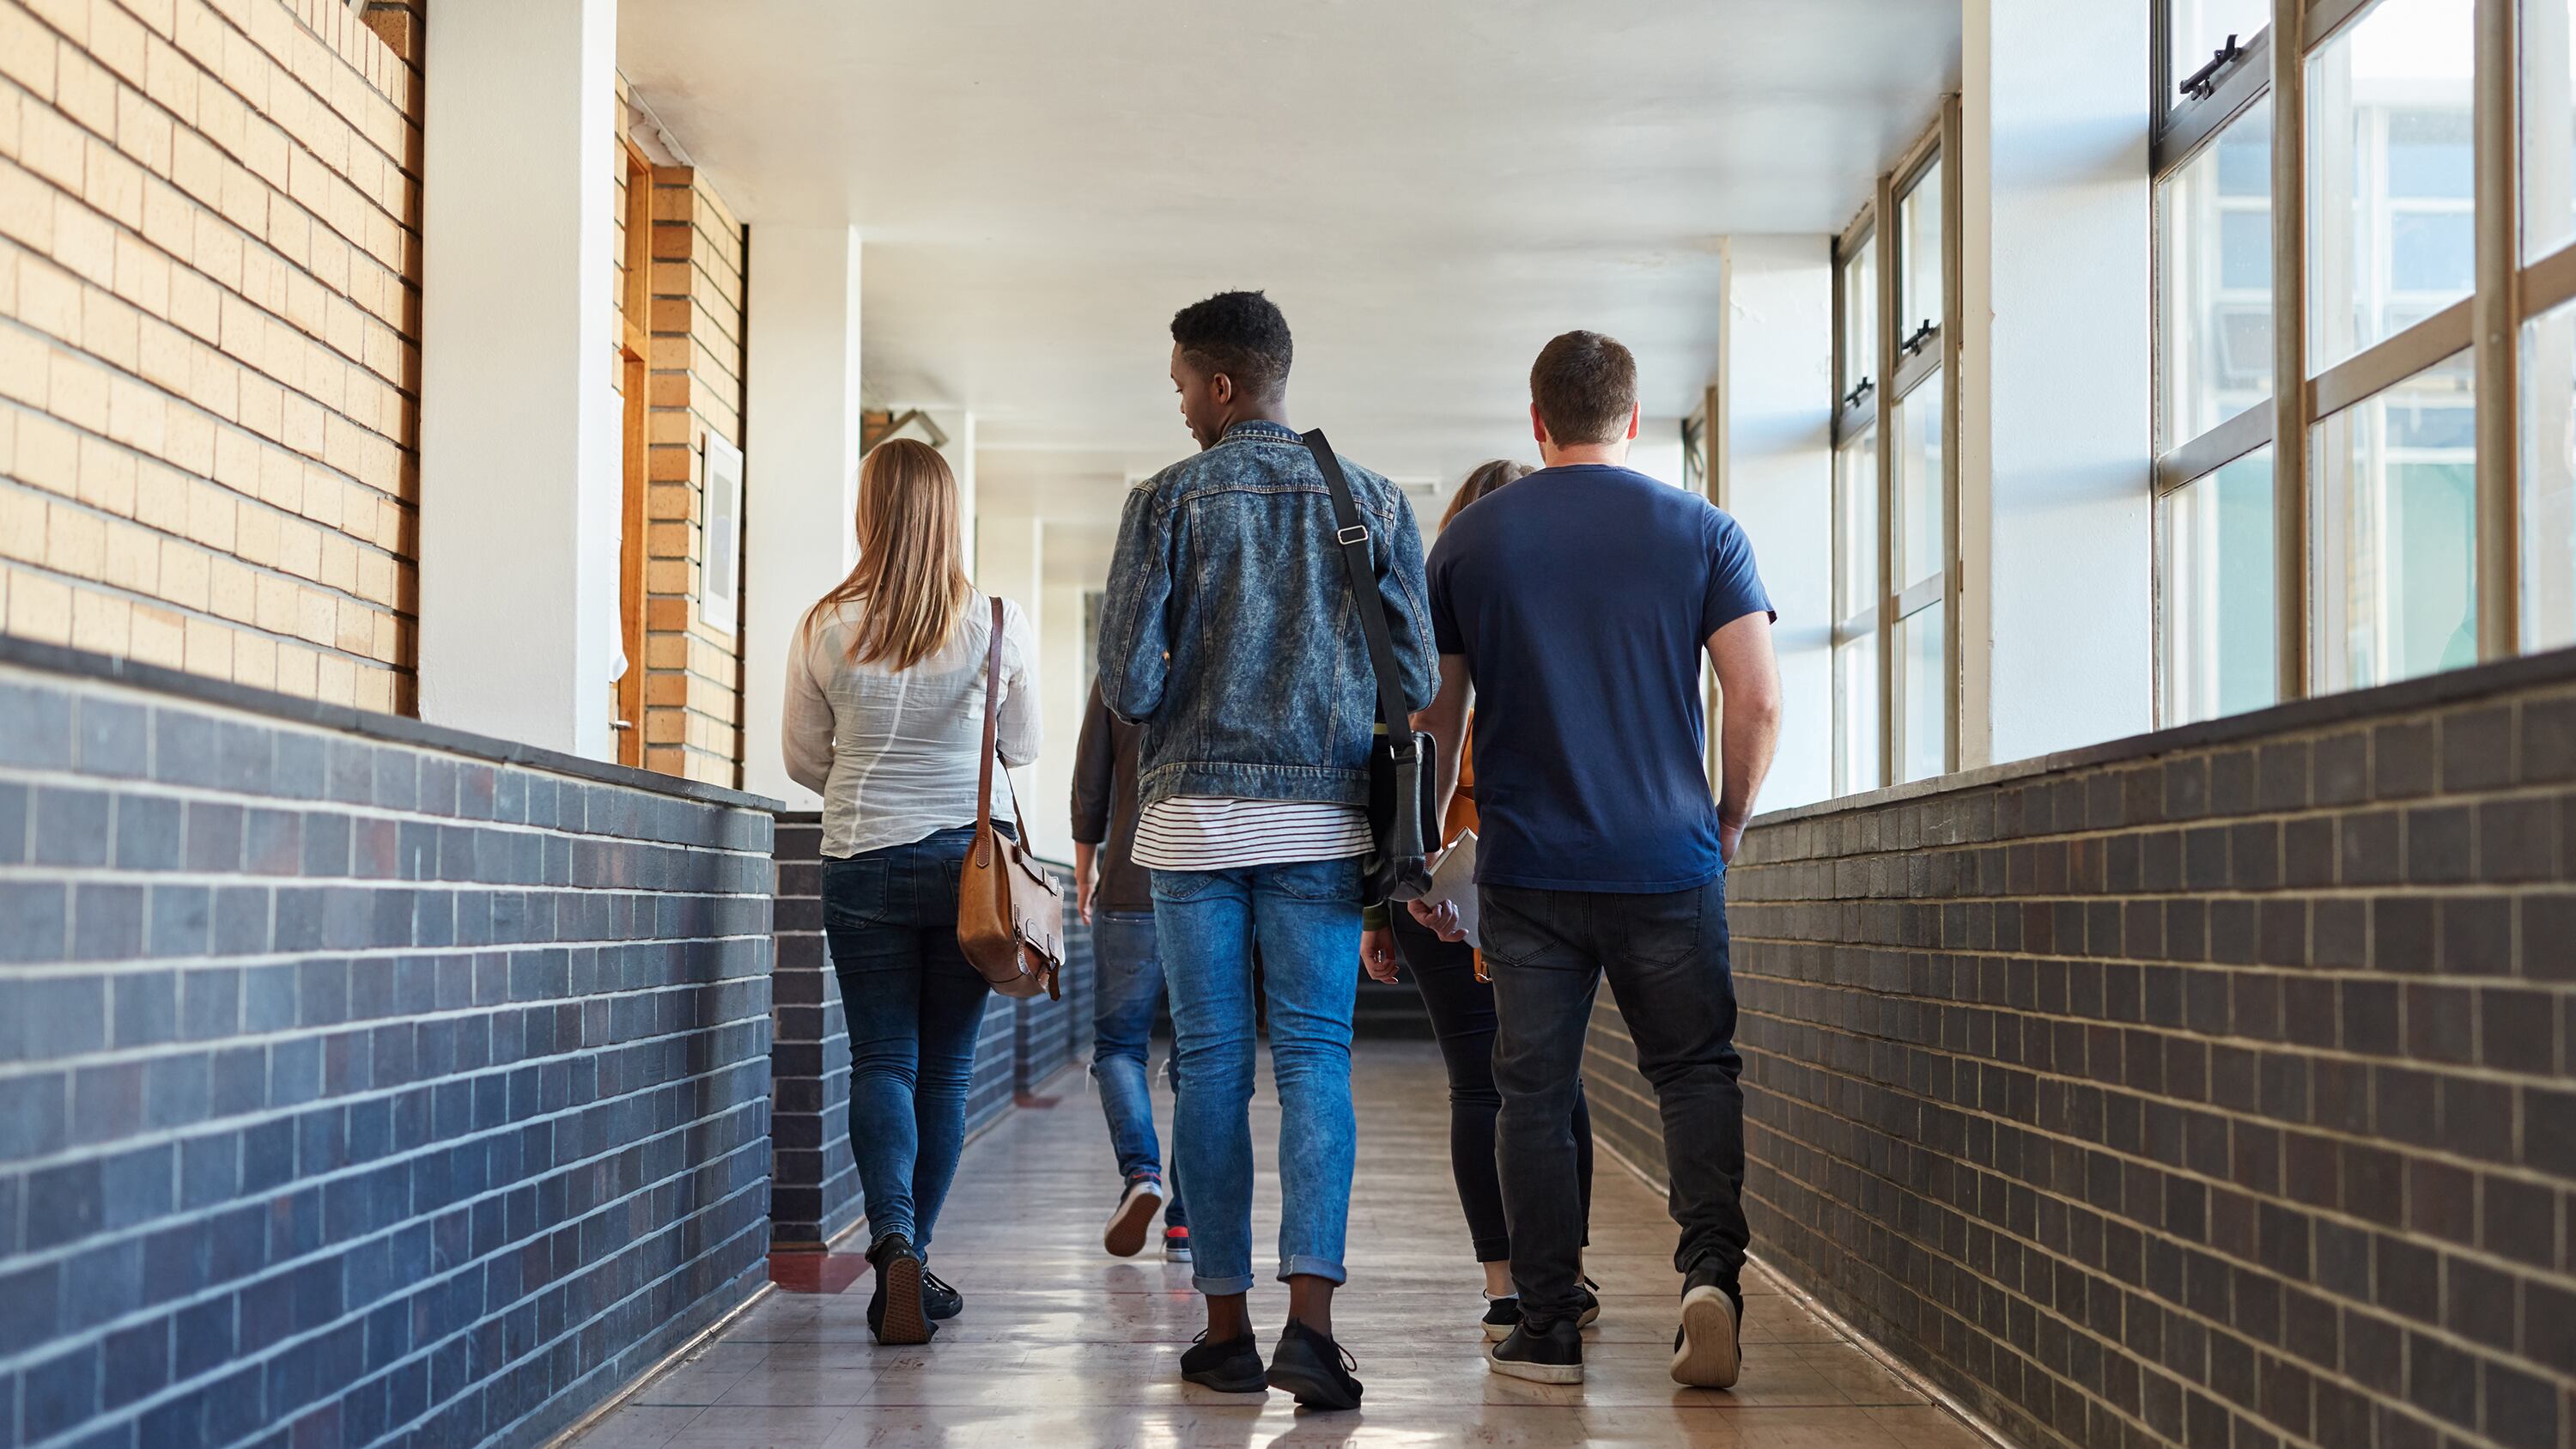 A photo from behind four high school students walking down a well lit hallway with a brick wall on the left and windows on the right.